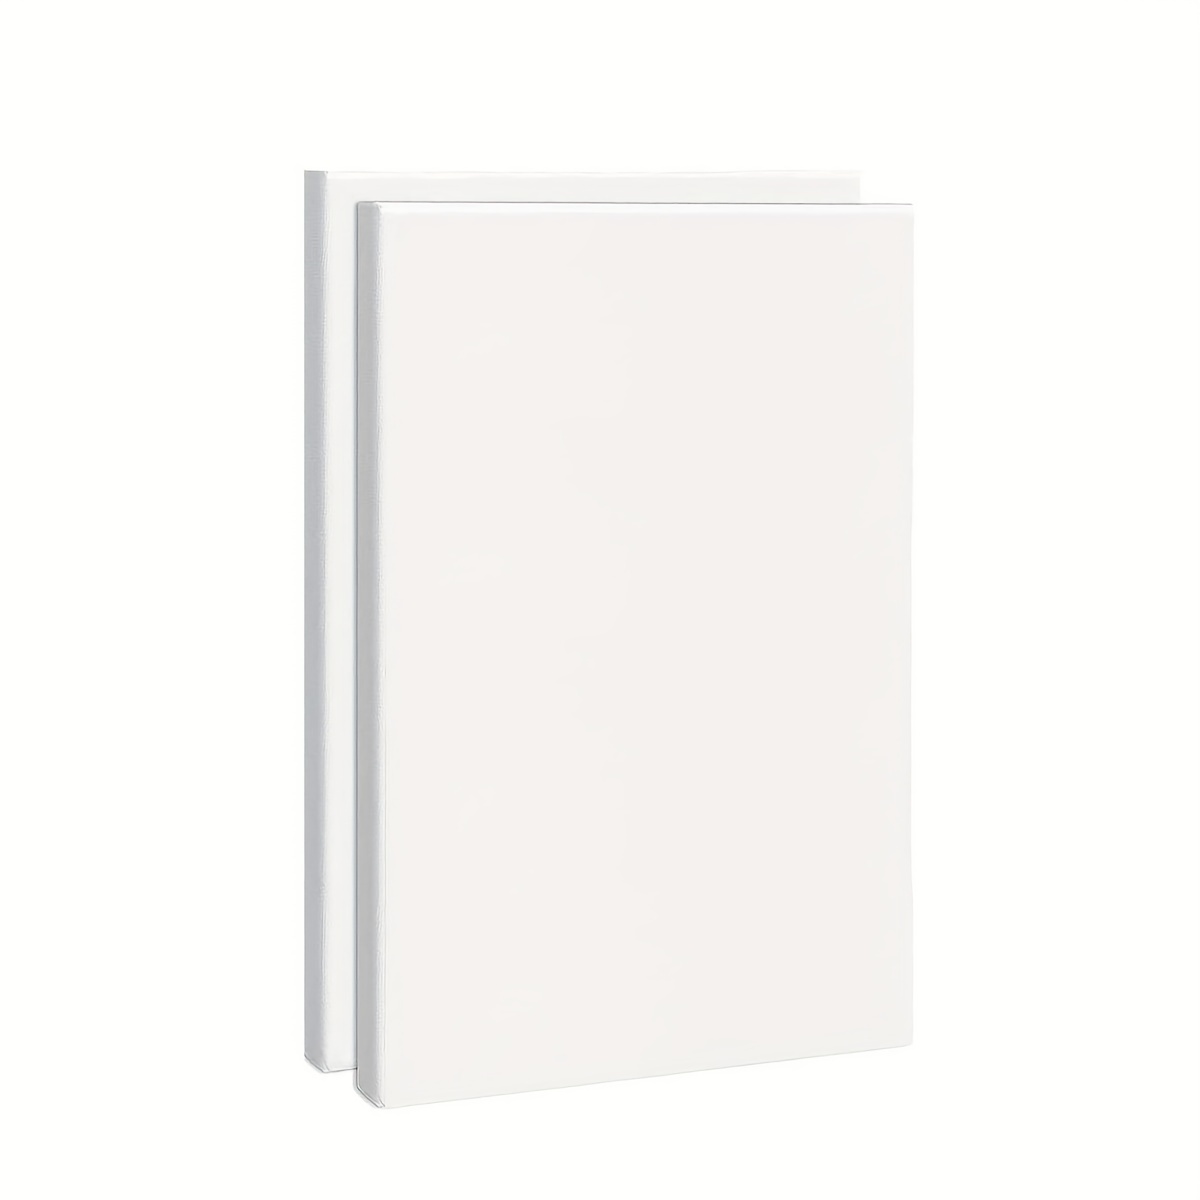 Paint Canvases For Painting, Pack Of 2, 8 X 12 Inches, Acid Free Canvases  For Painting, Art Supplies For Adults And Teens, White Blank Flat Canvas Bo